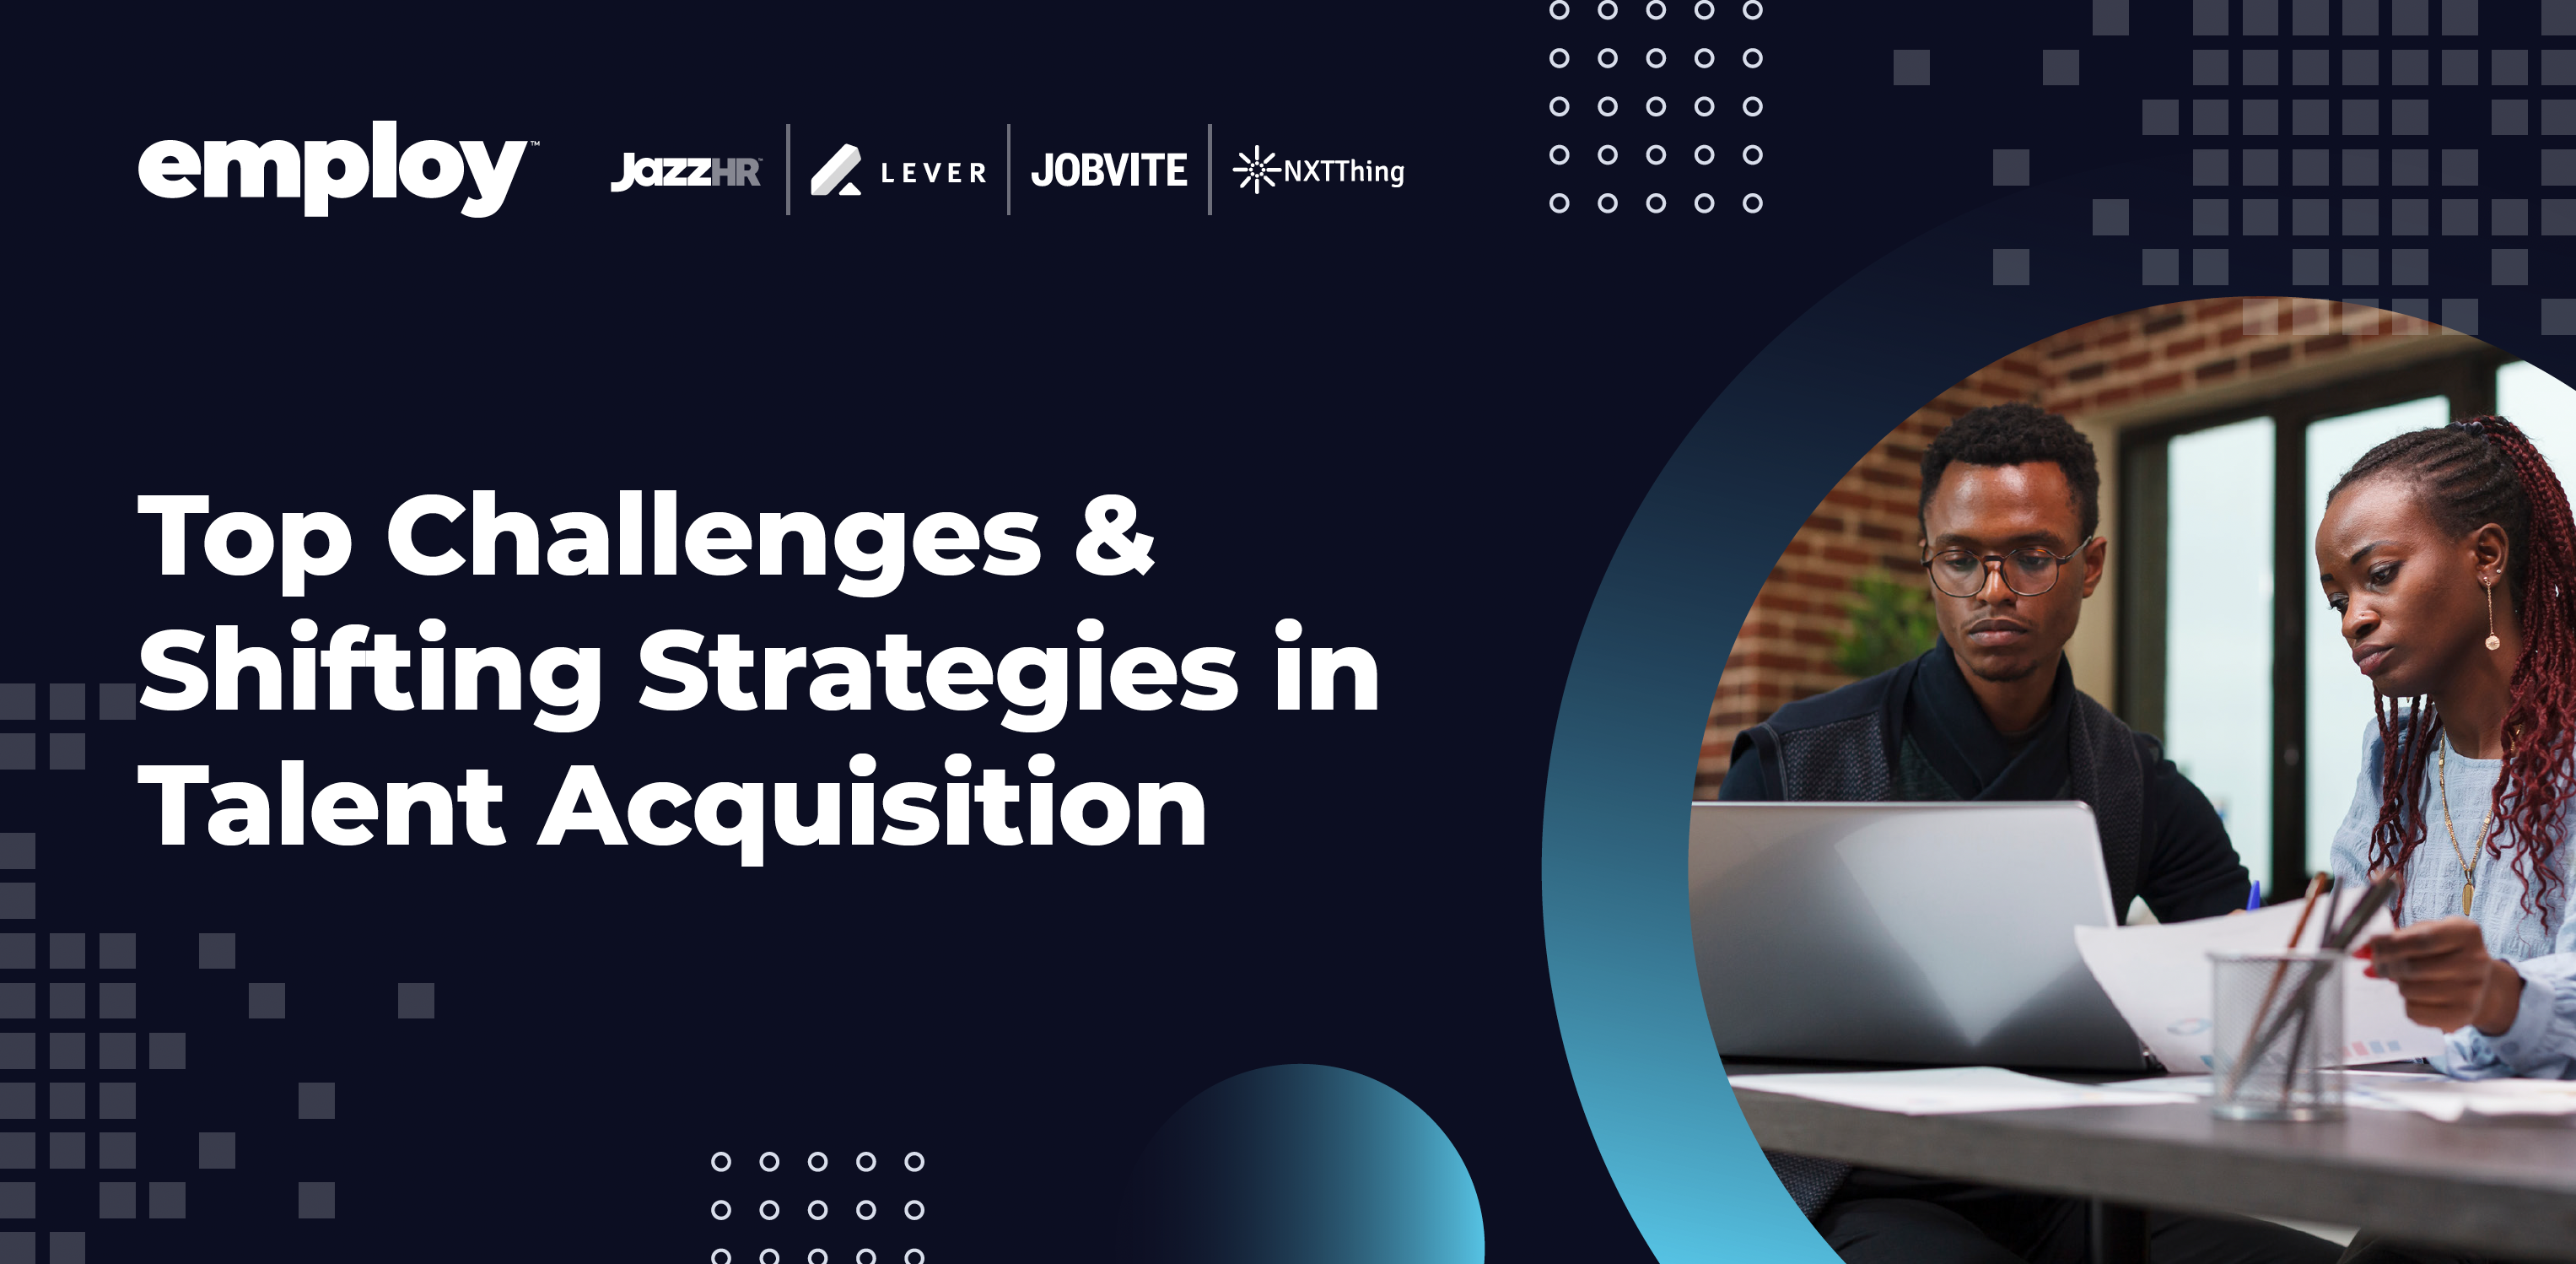 Top Challenges & Shifting Strategies in Talent Acquisition